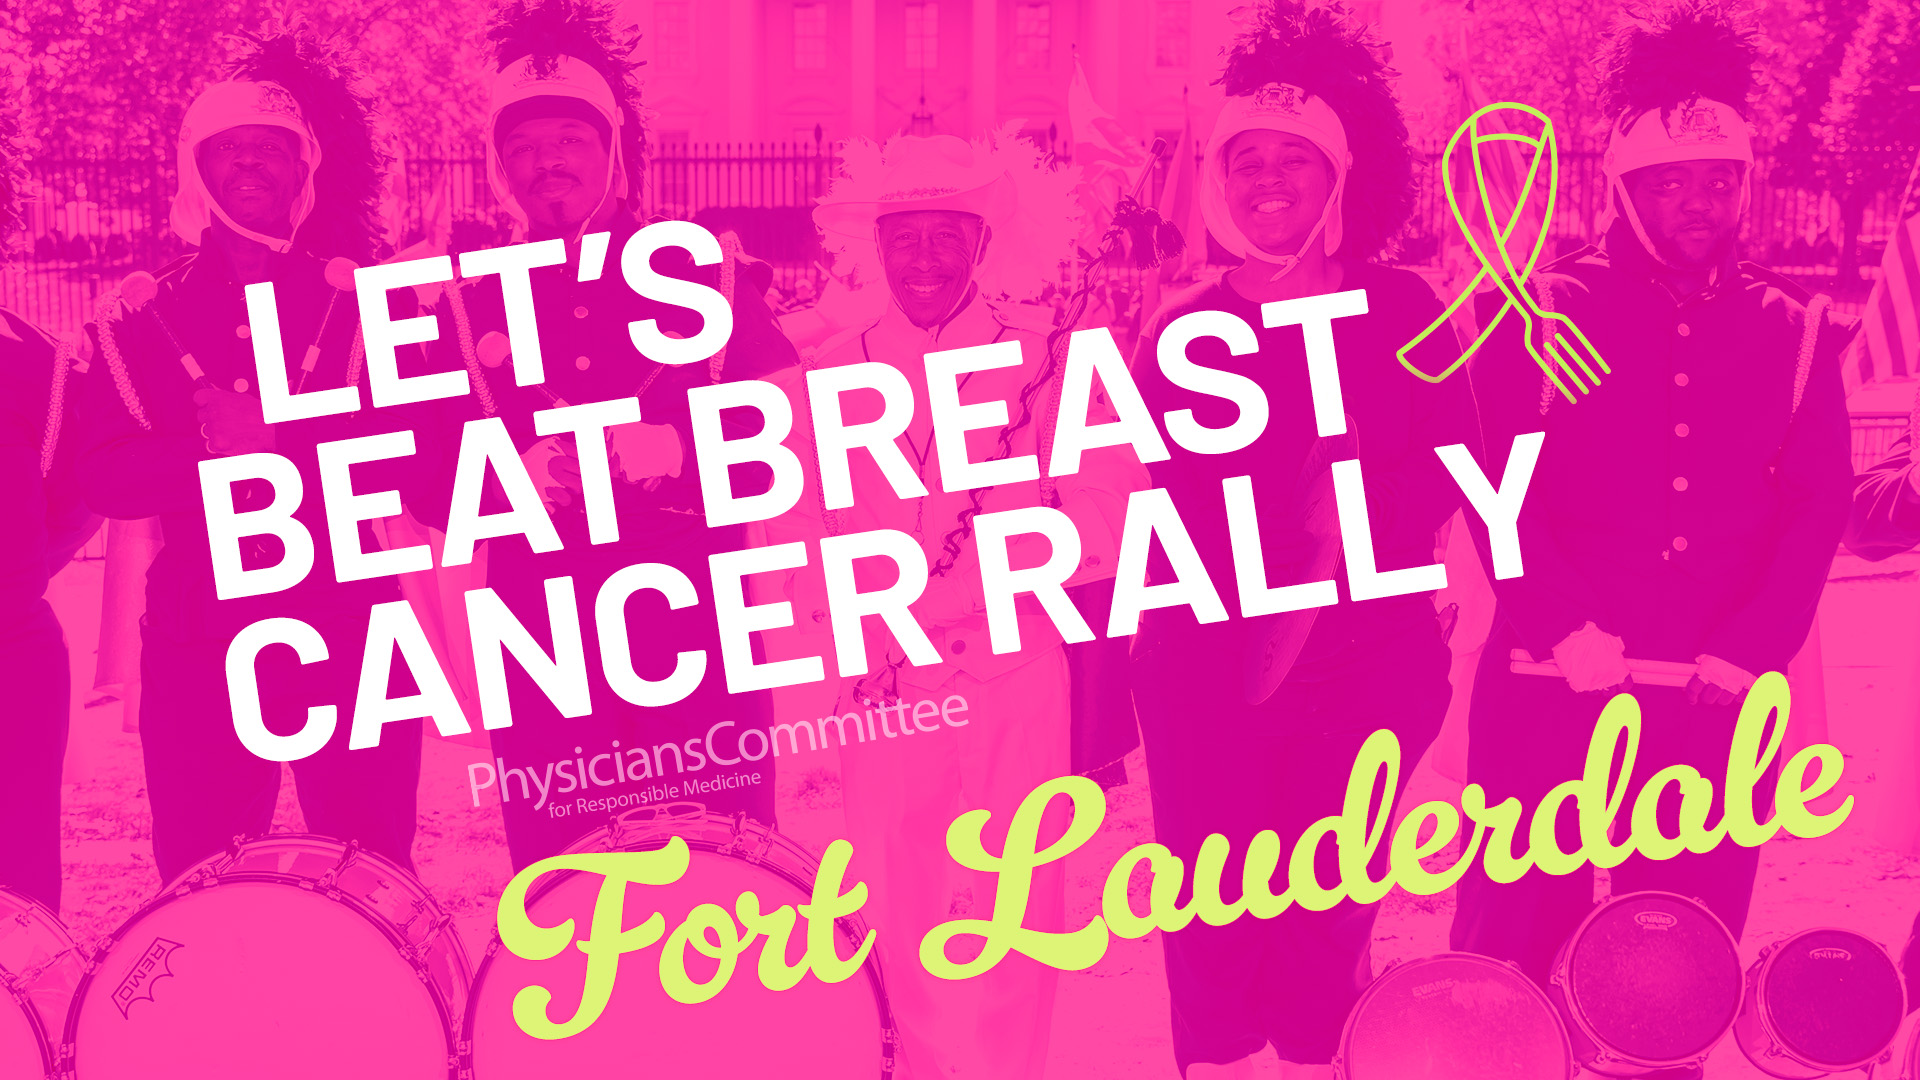 Let's Beat Breast Cancer Rally